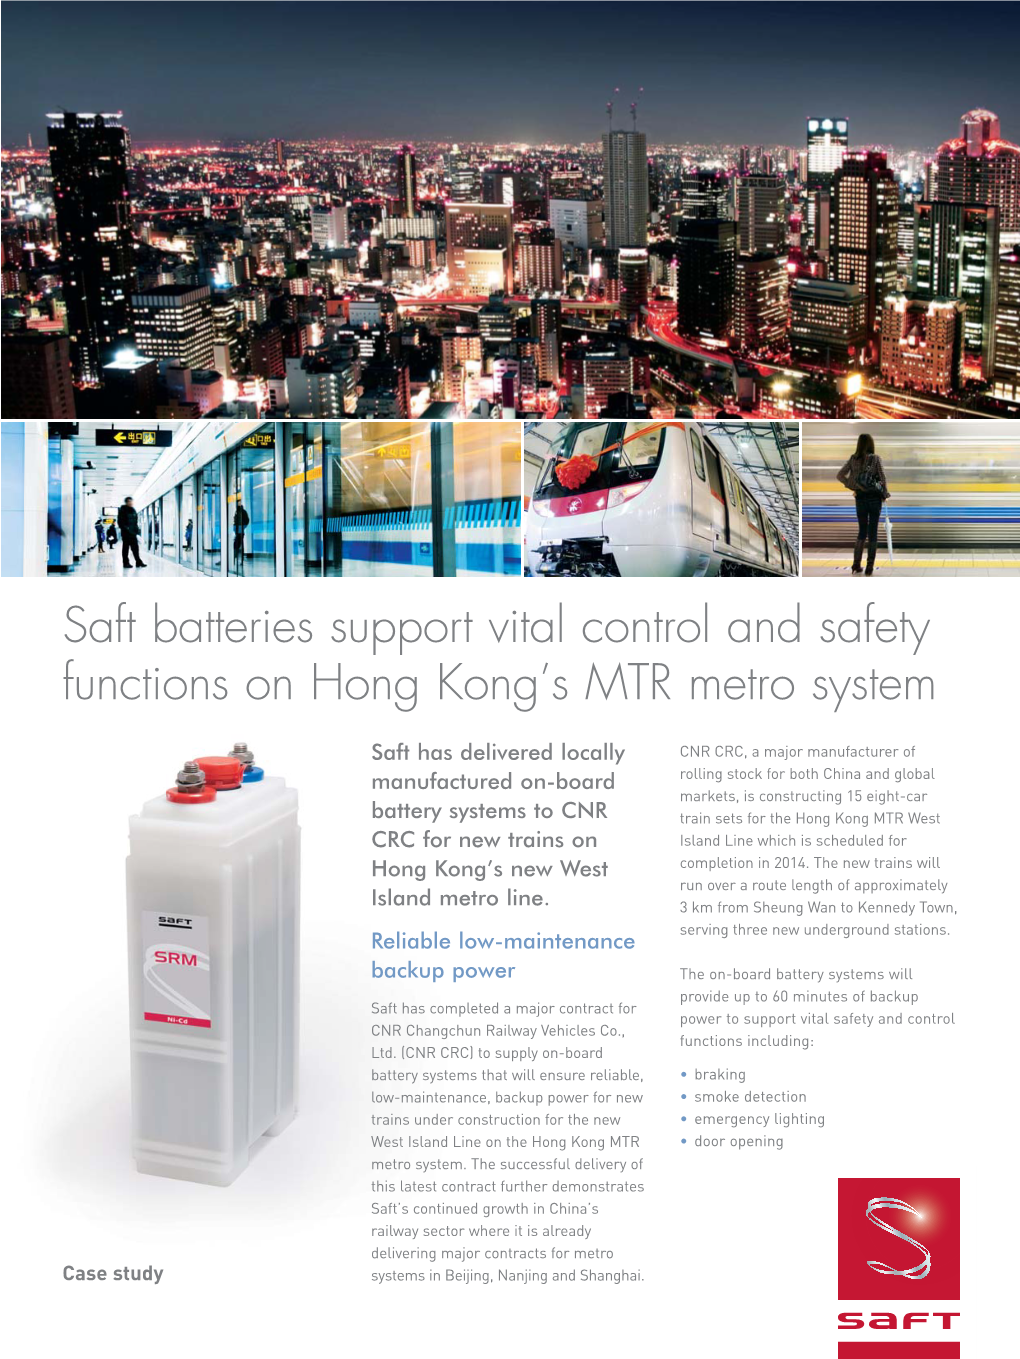 Saft Batteries Support Vital Control and Safety Functions on Hong Kong's MTR Metro System